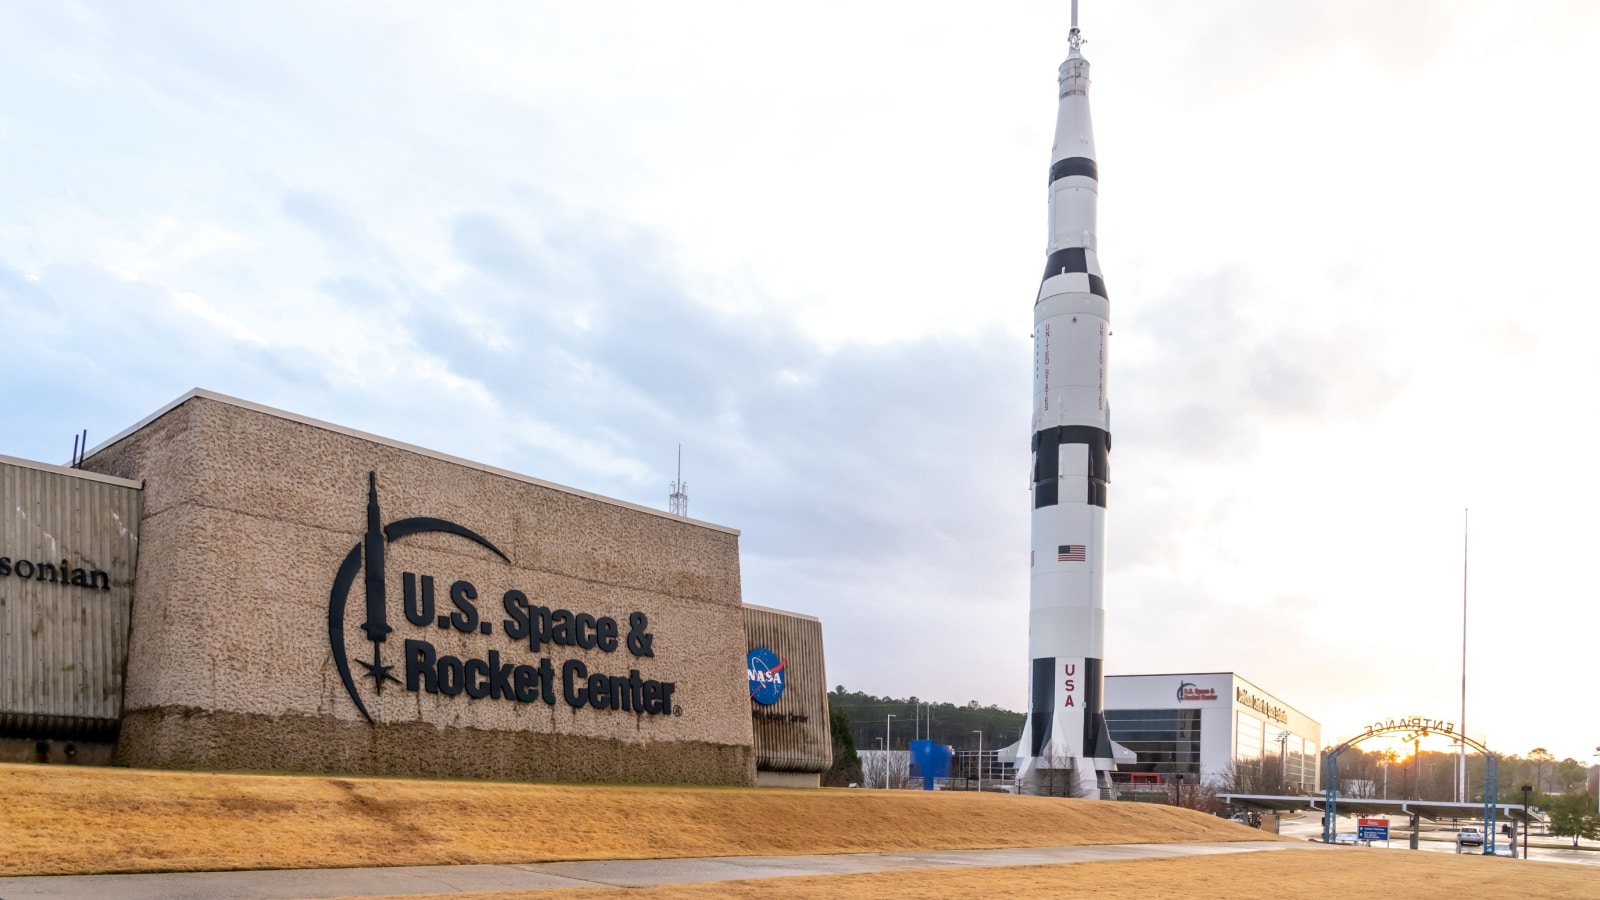 <p>Located in Huntsville, this center is a must-visit for space enthusiasts. It houses the Saturn V rocket and offers an immersive educational experience about space exploration.</p>